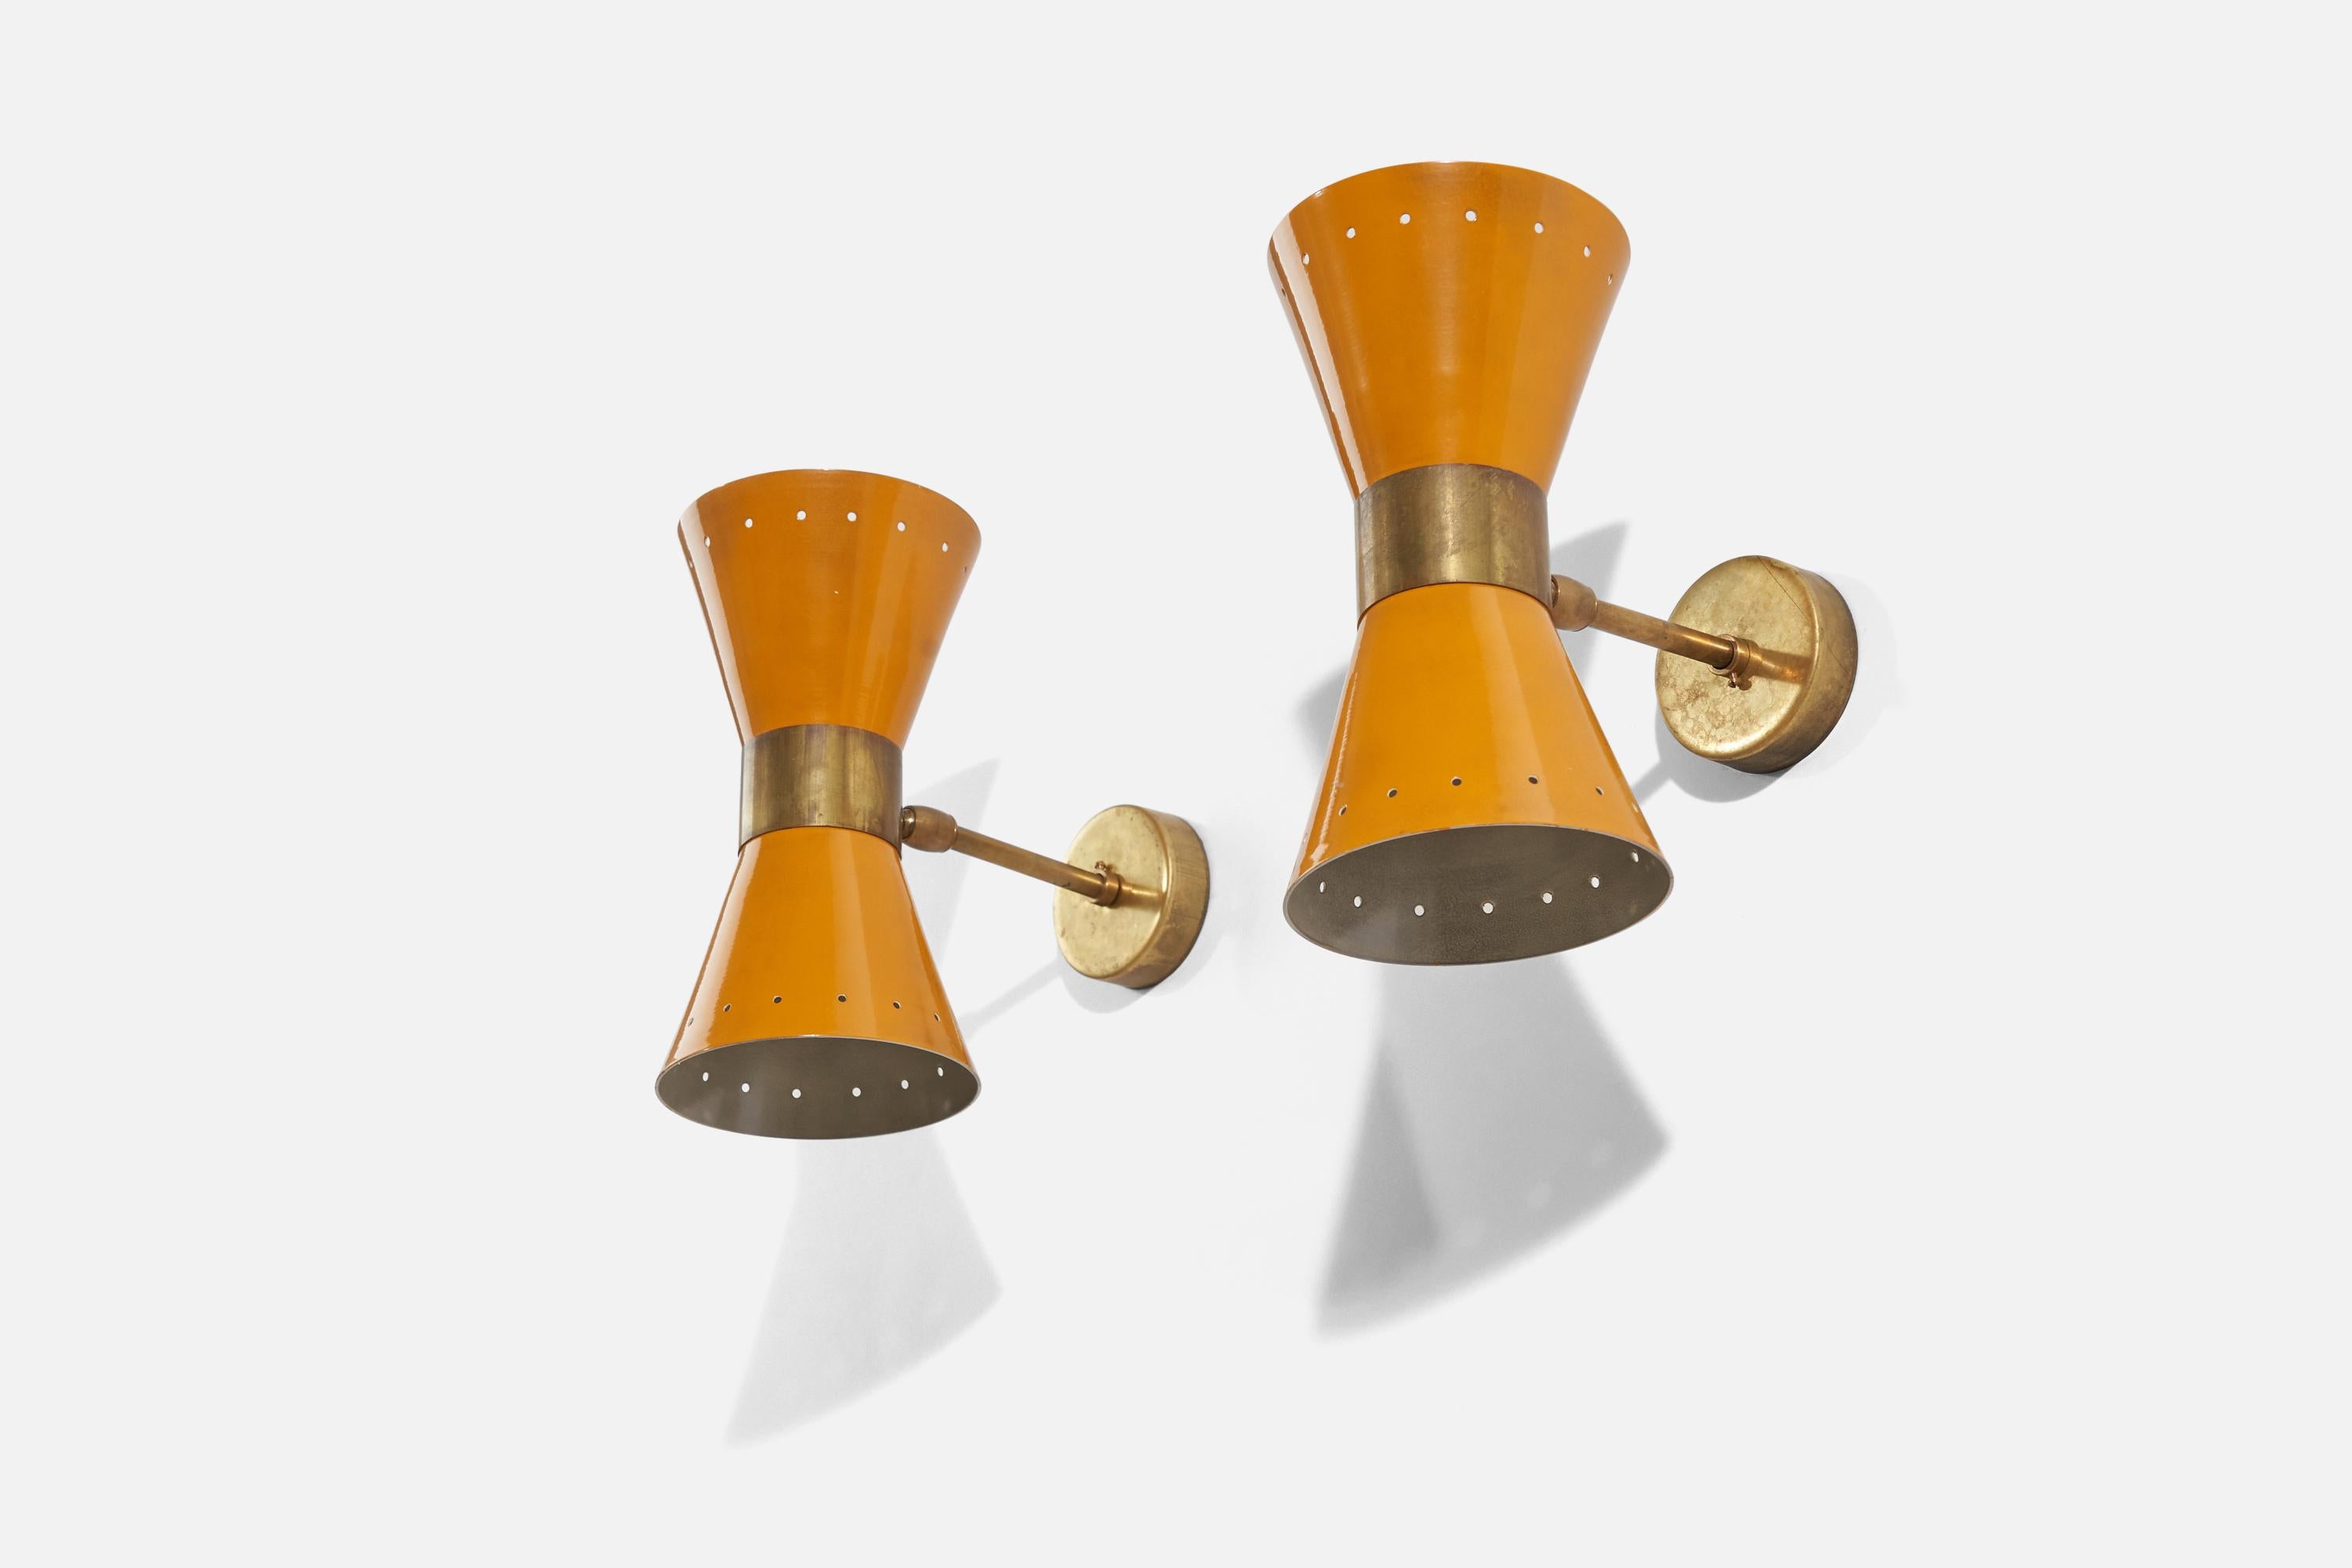 A pair of brass and yellow-orange metal wall lights designed and produced by an Italian designer, Italy, 1960s.